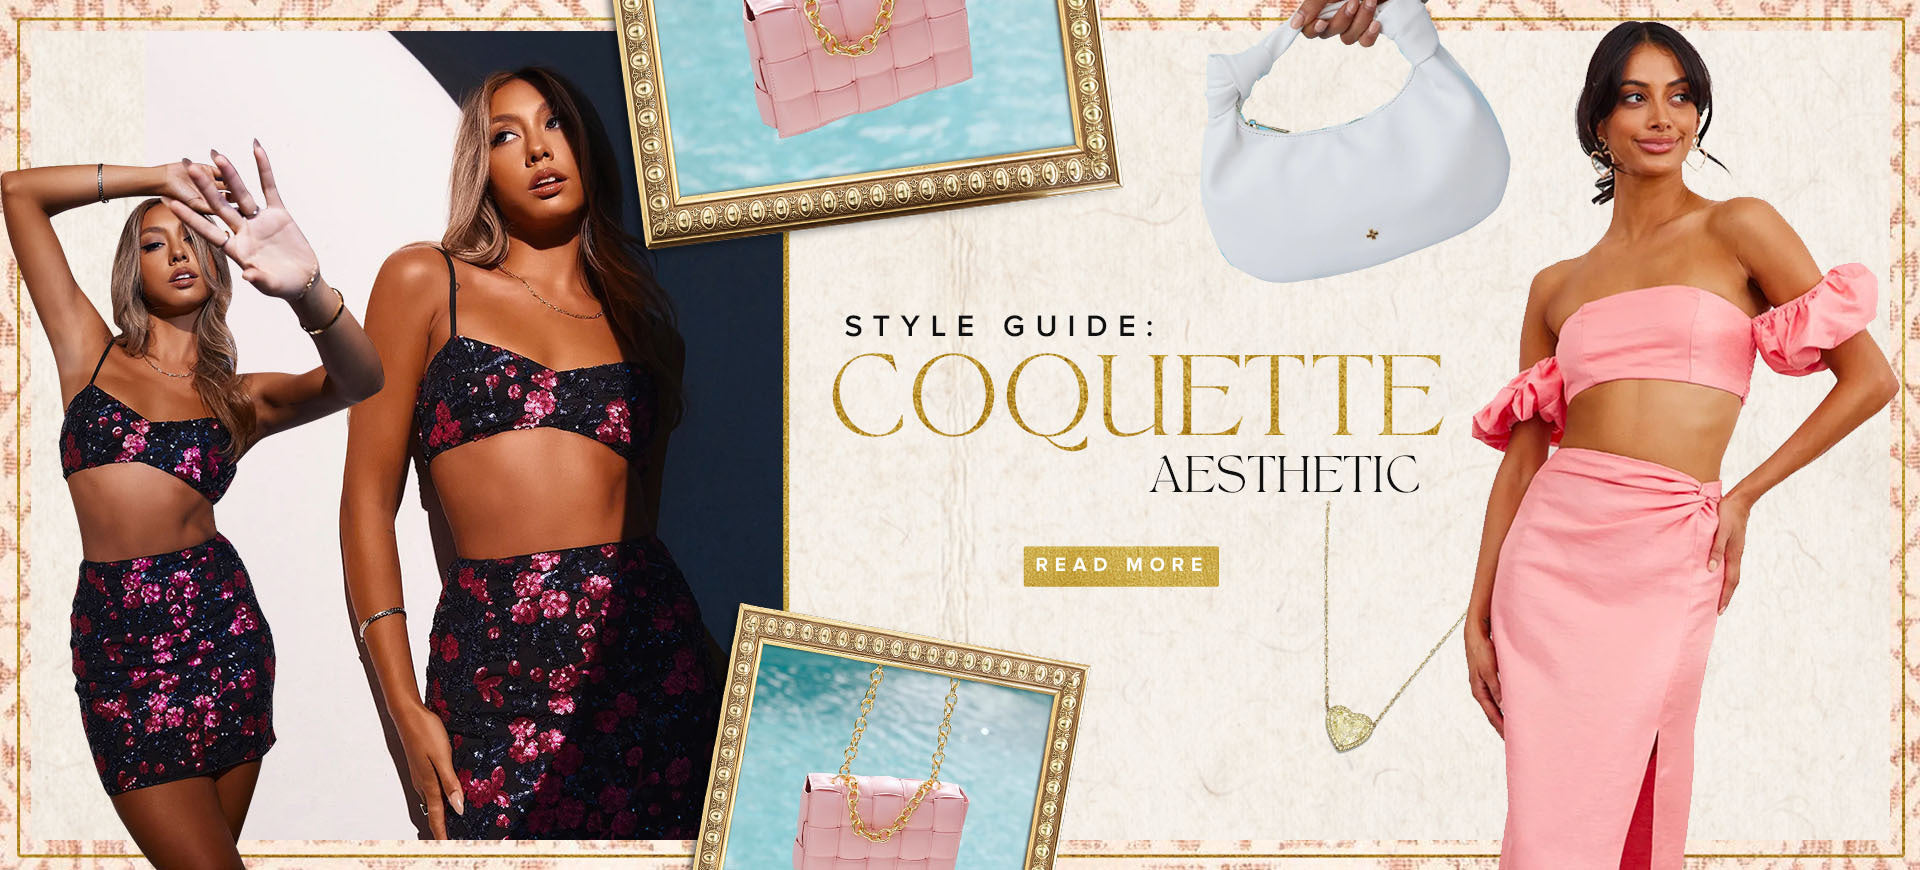 The Other Aesthetic on Instagram: Up your coquette style, here